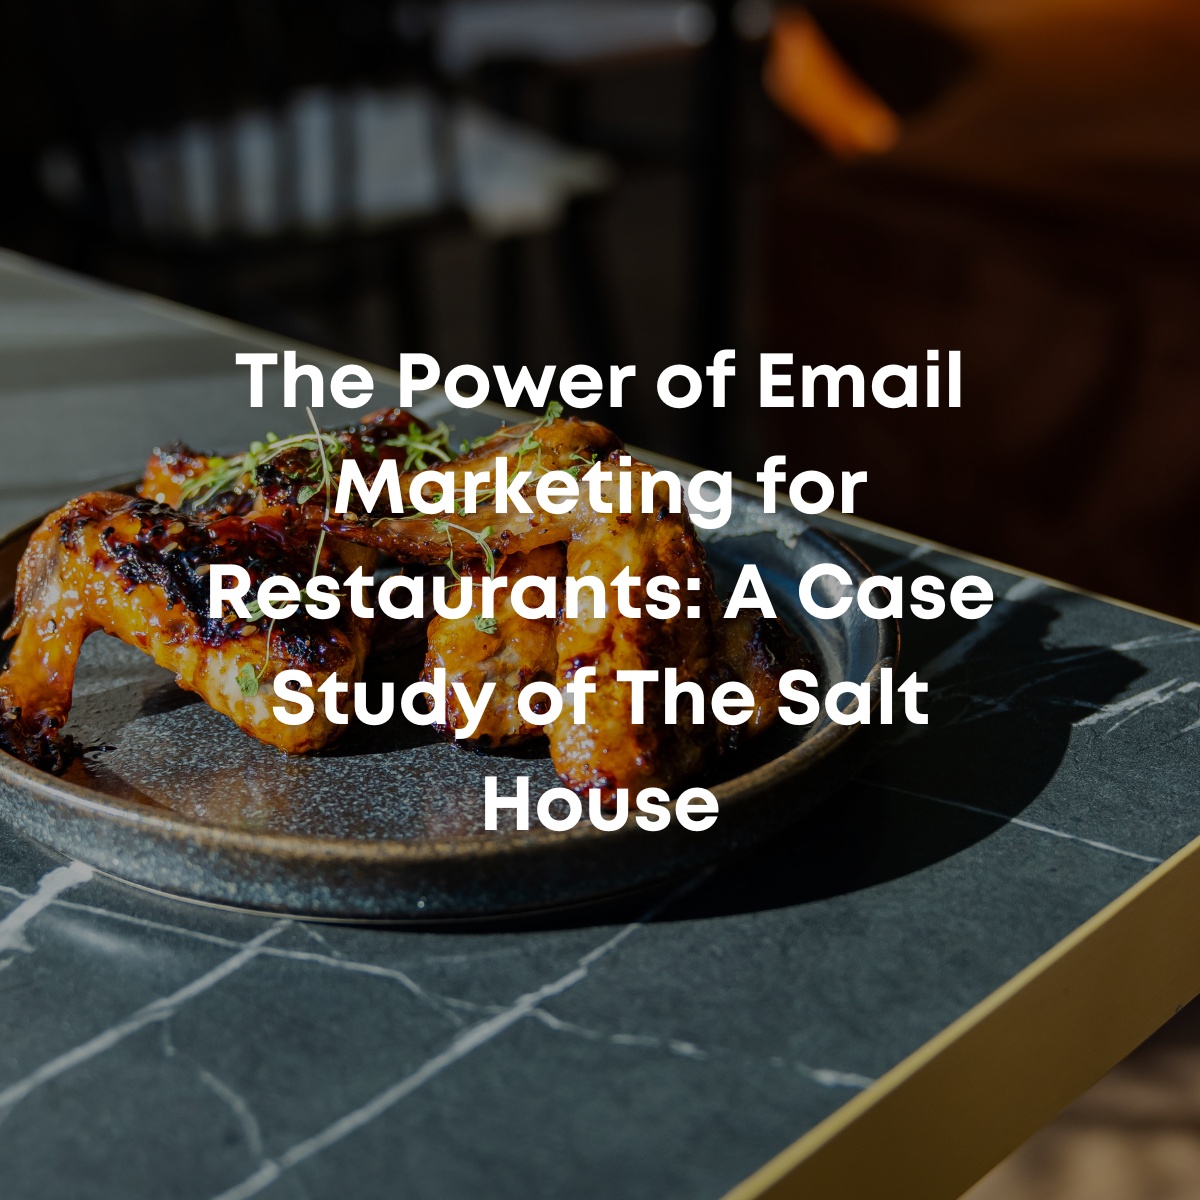 The Power of Email Marketing for Restaurants: A Case Study of The Salt House